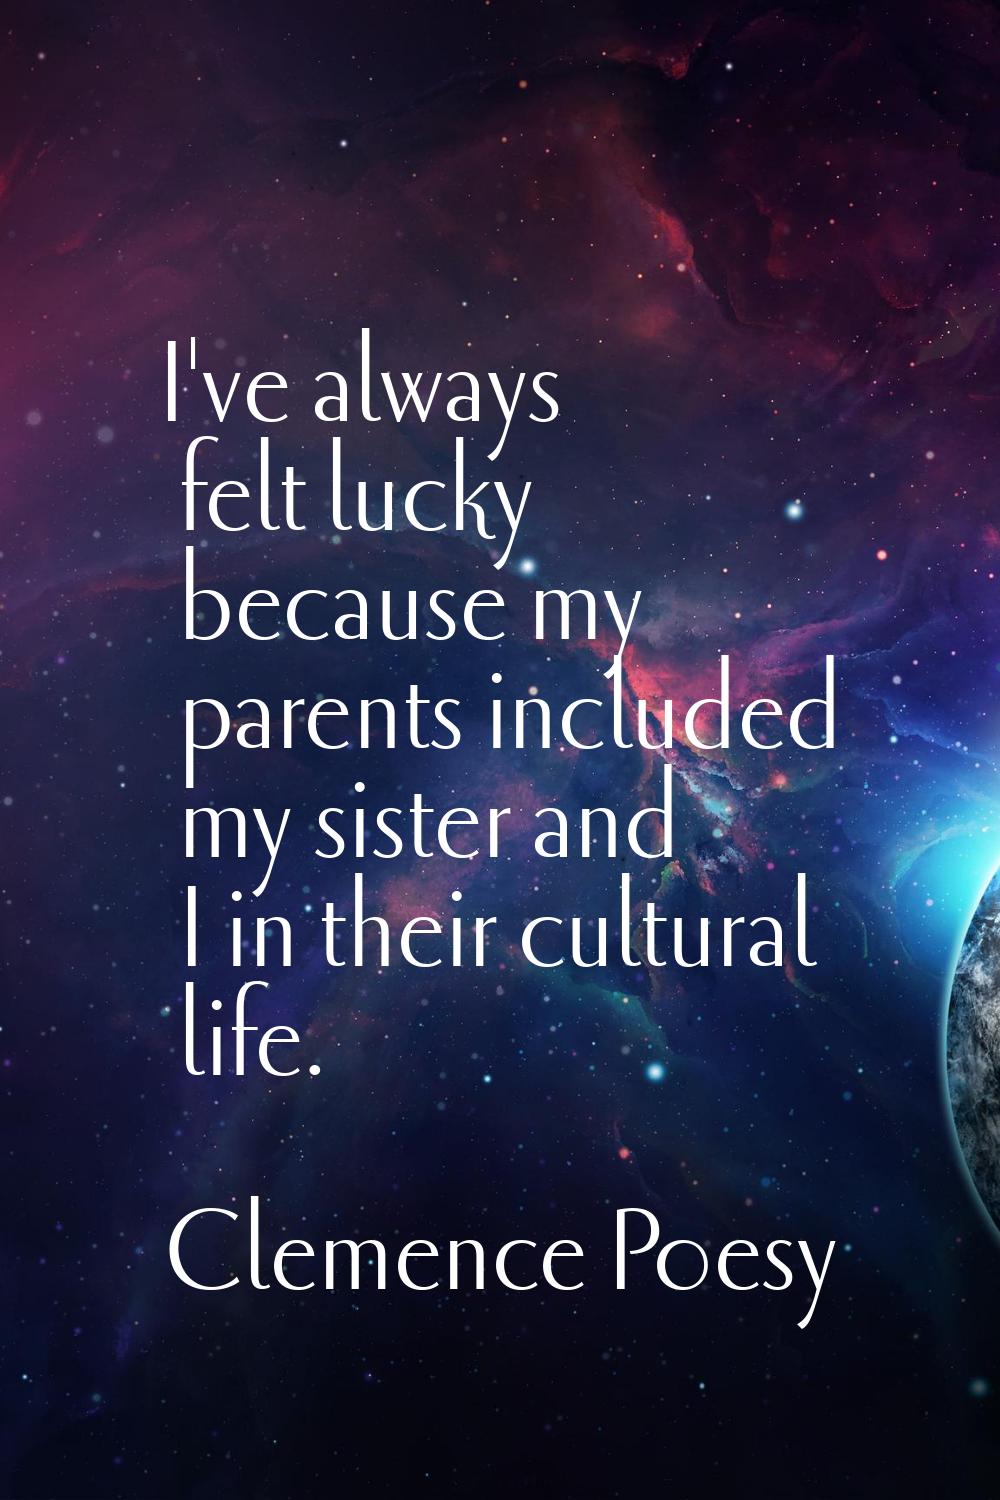 I've always felt lucky because my parents included my sister and I in their cultural life.